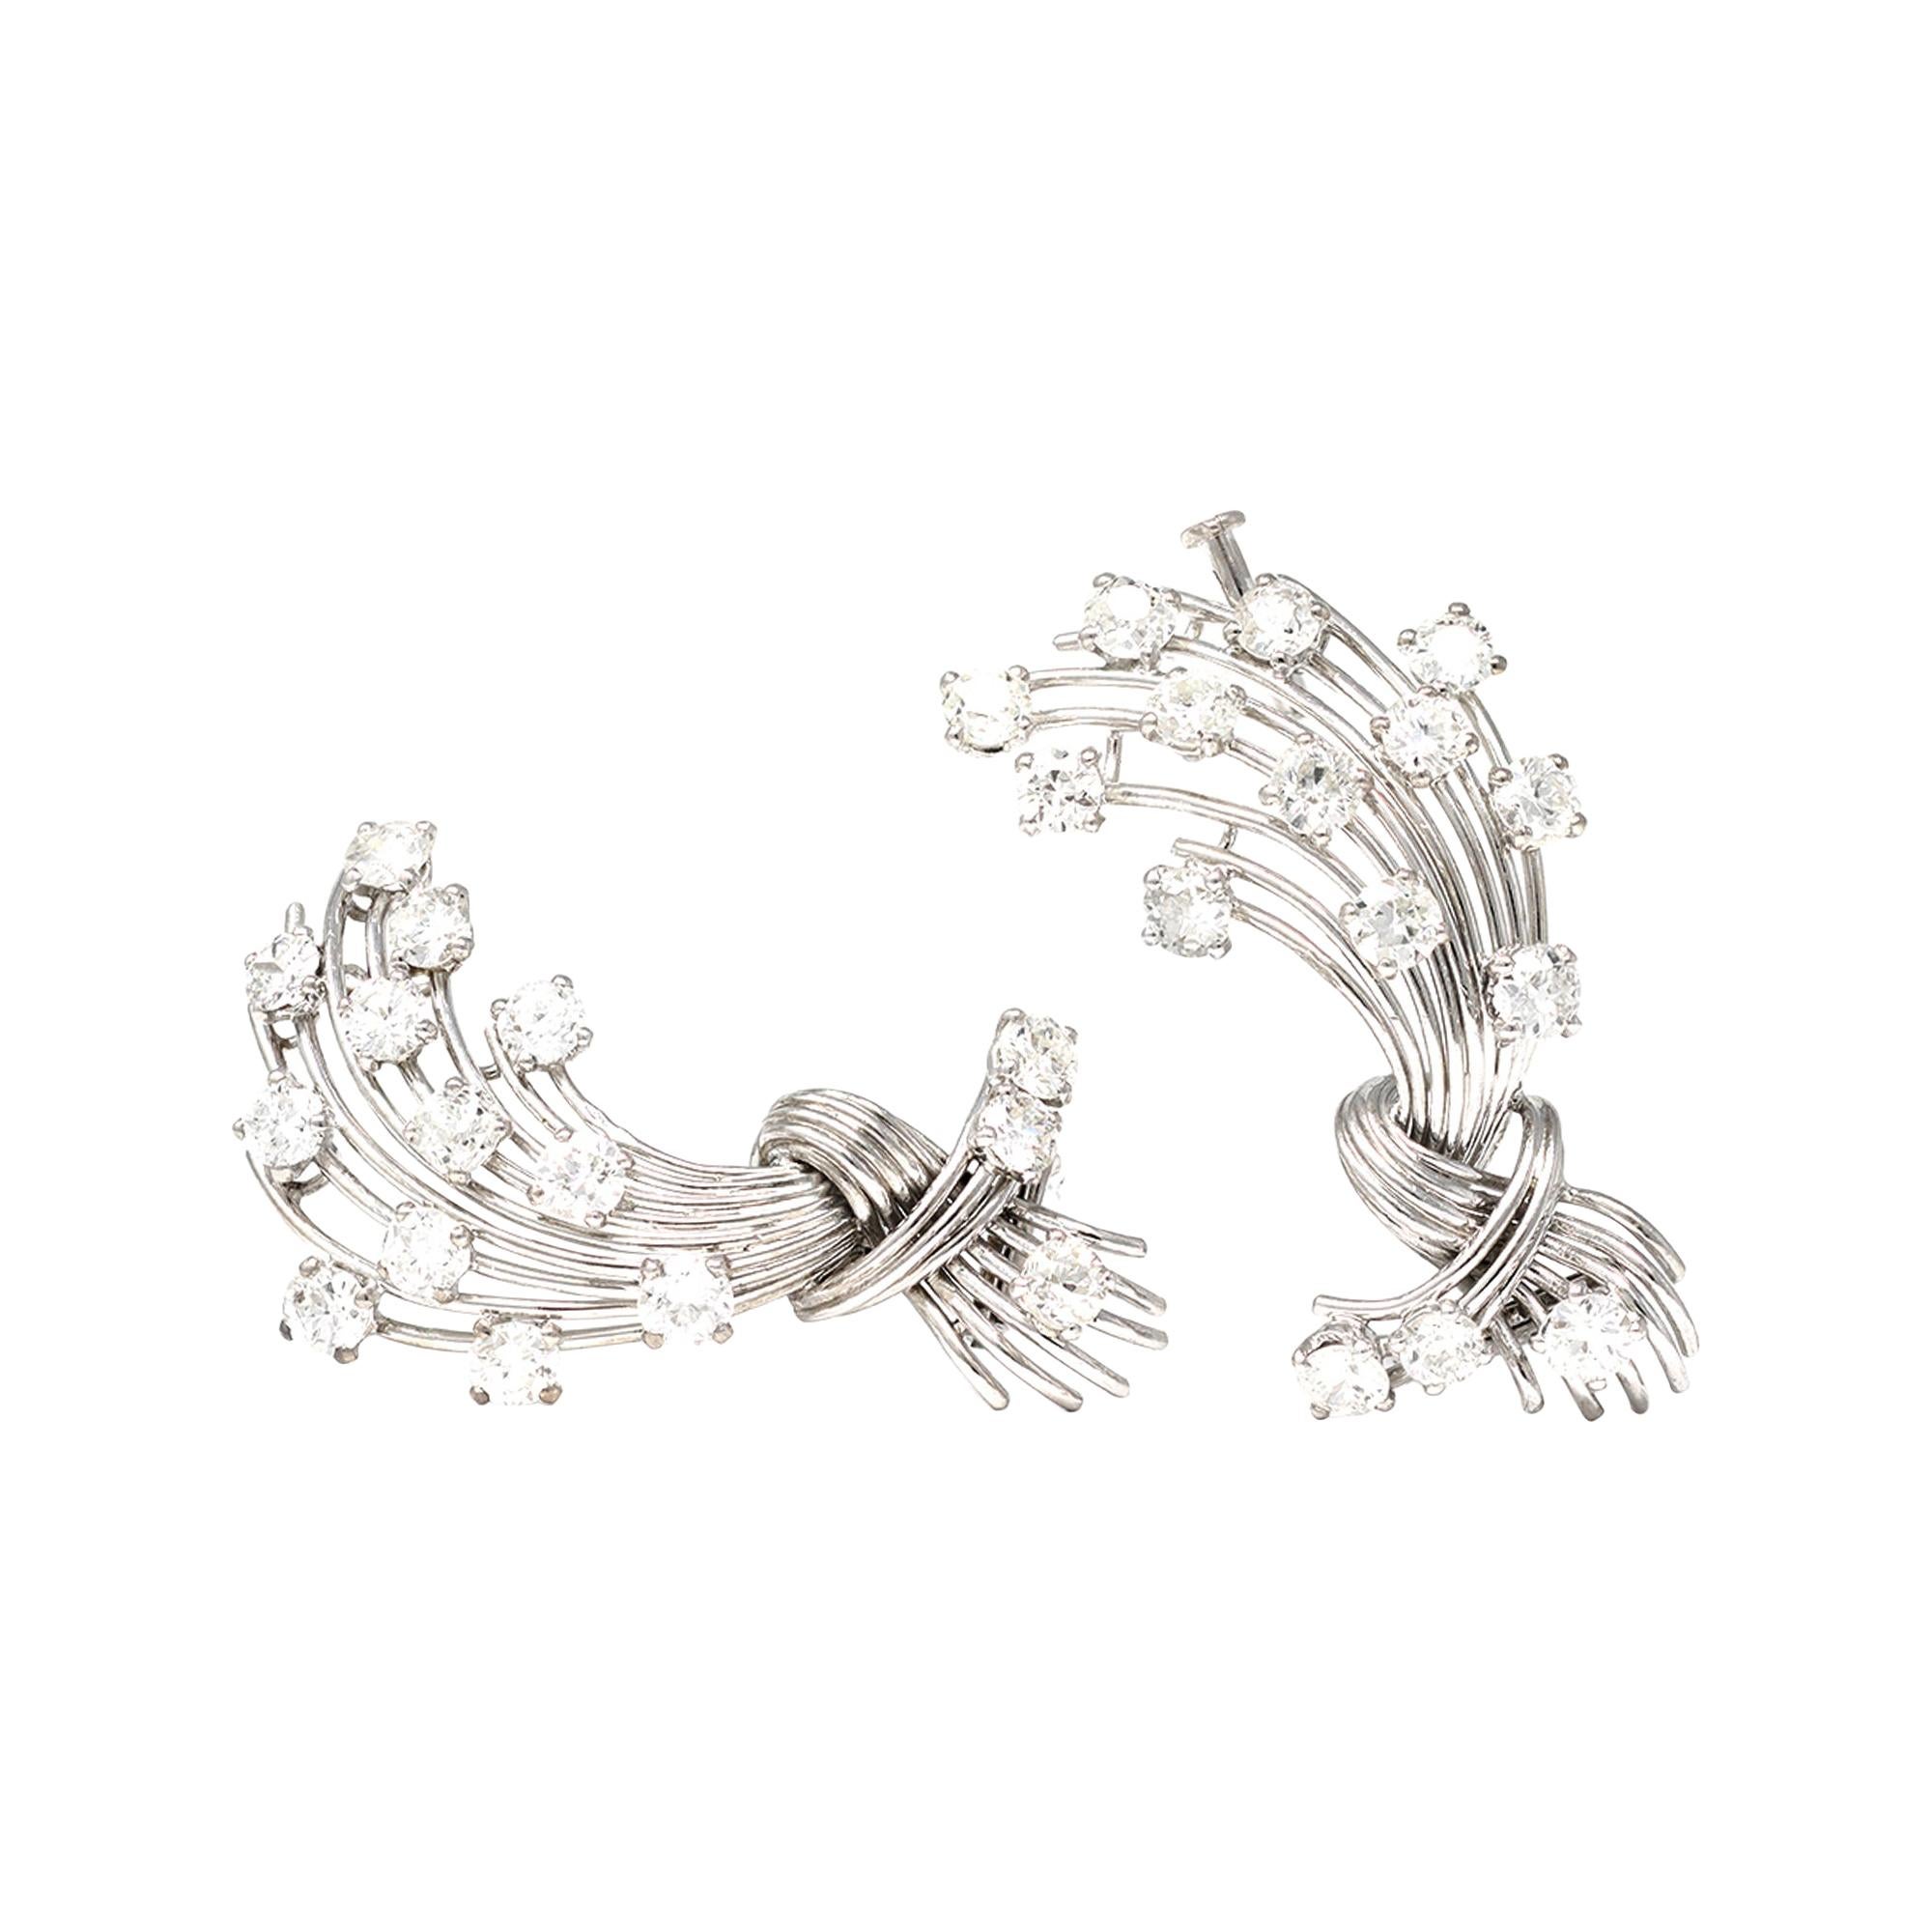 Signed Mauboussin Paris Pair of Clips in Platinum and 18k For Sale